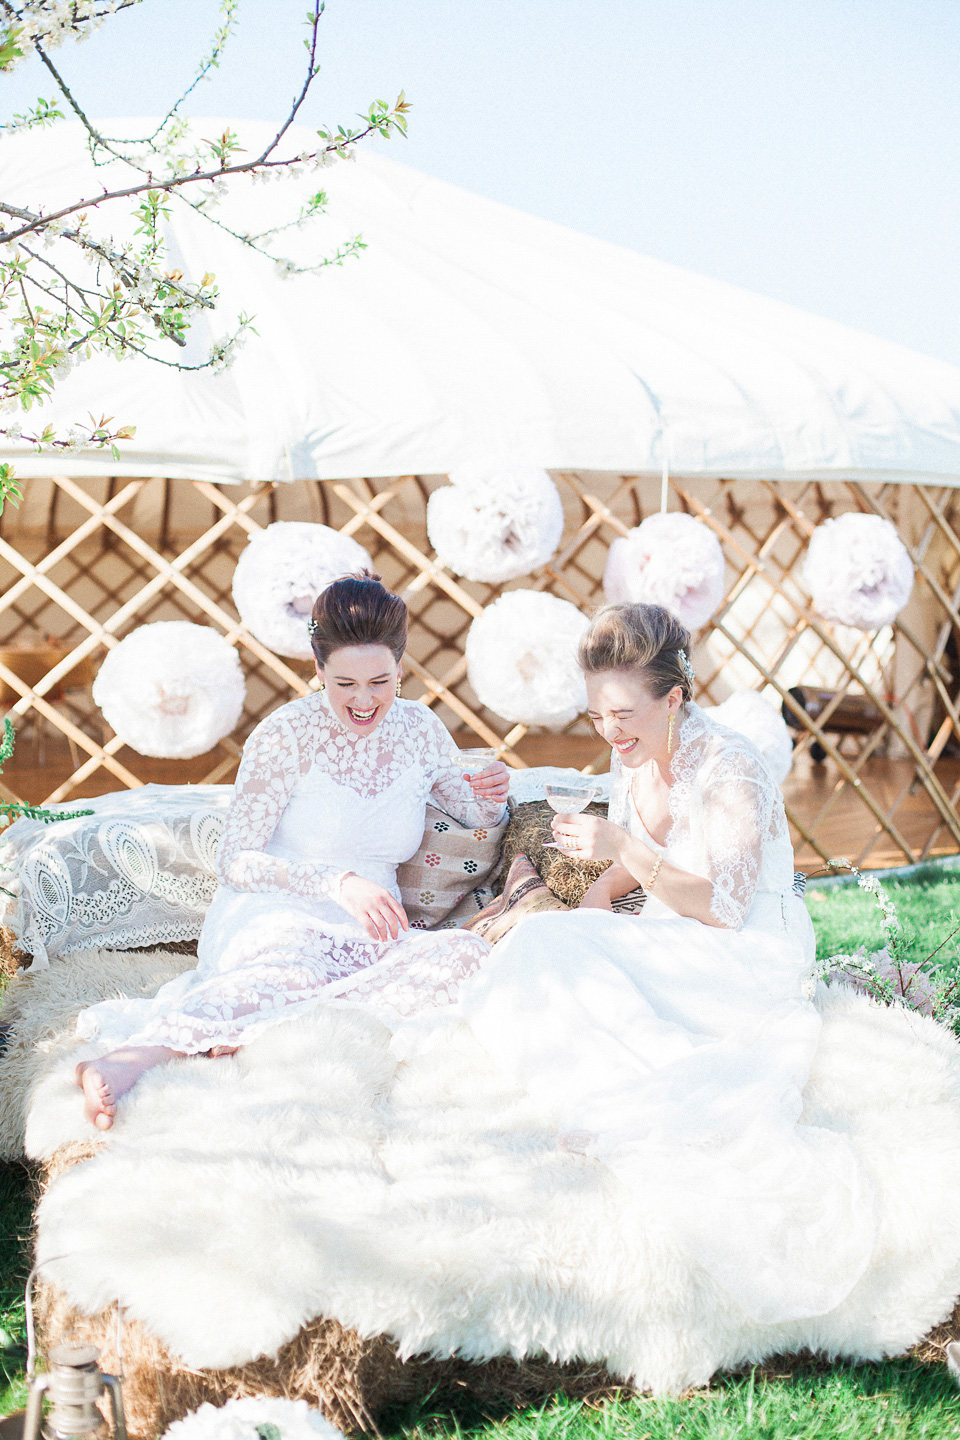 Pastel shades and pretty flowers, Spring and Summer outdoor wedding inspiration with Wedding Yurts - visit weddingyurts.co.uk.